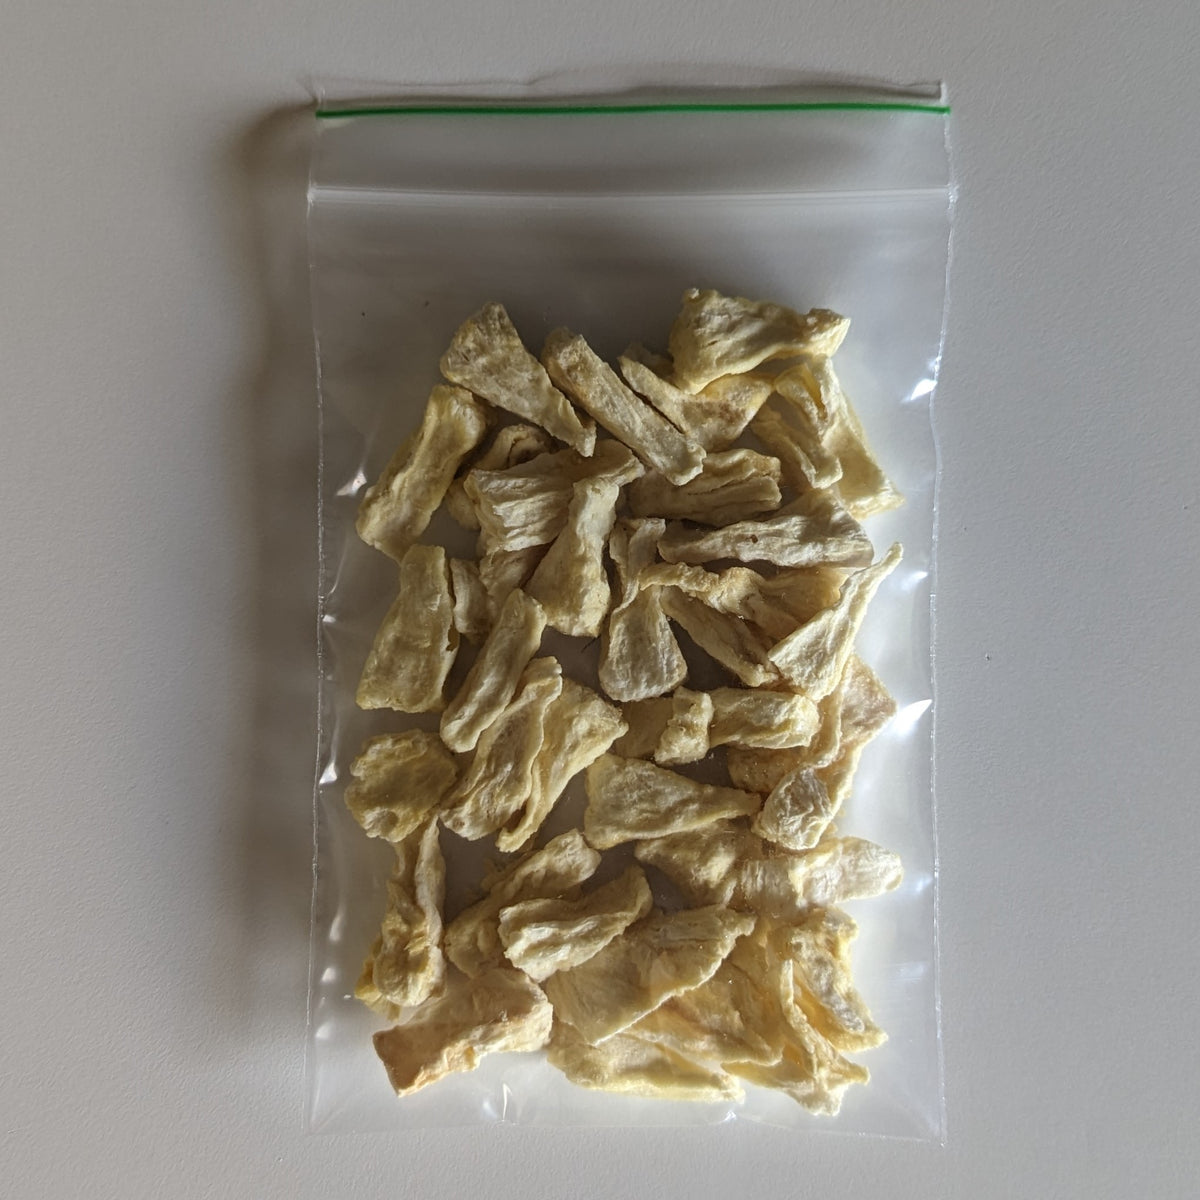 Snack Size Clear Landfill-Biodegradable Plastic Ziplock Bags 2